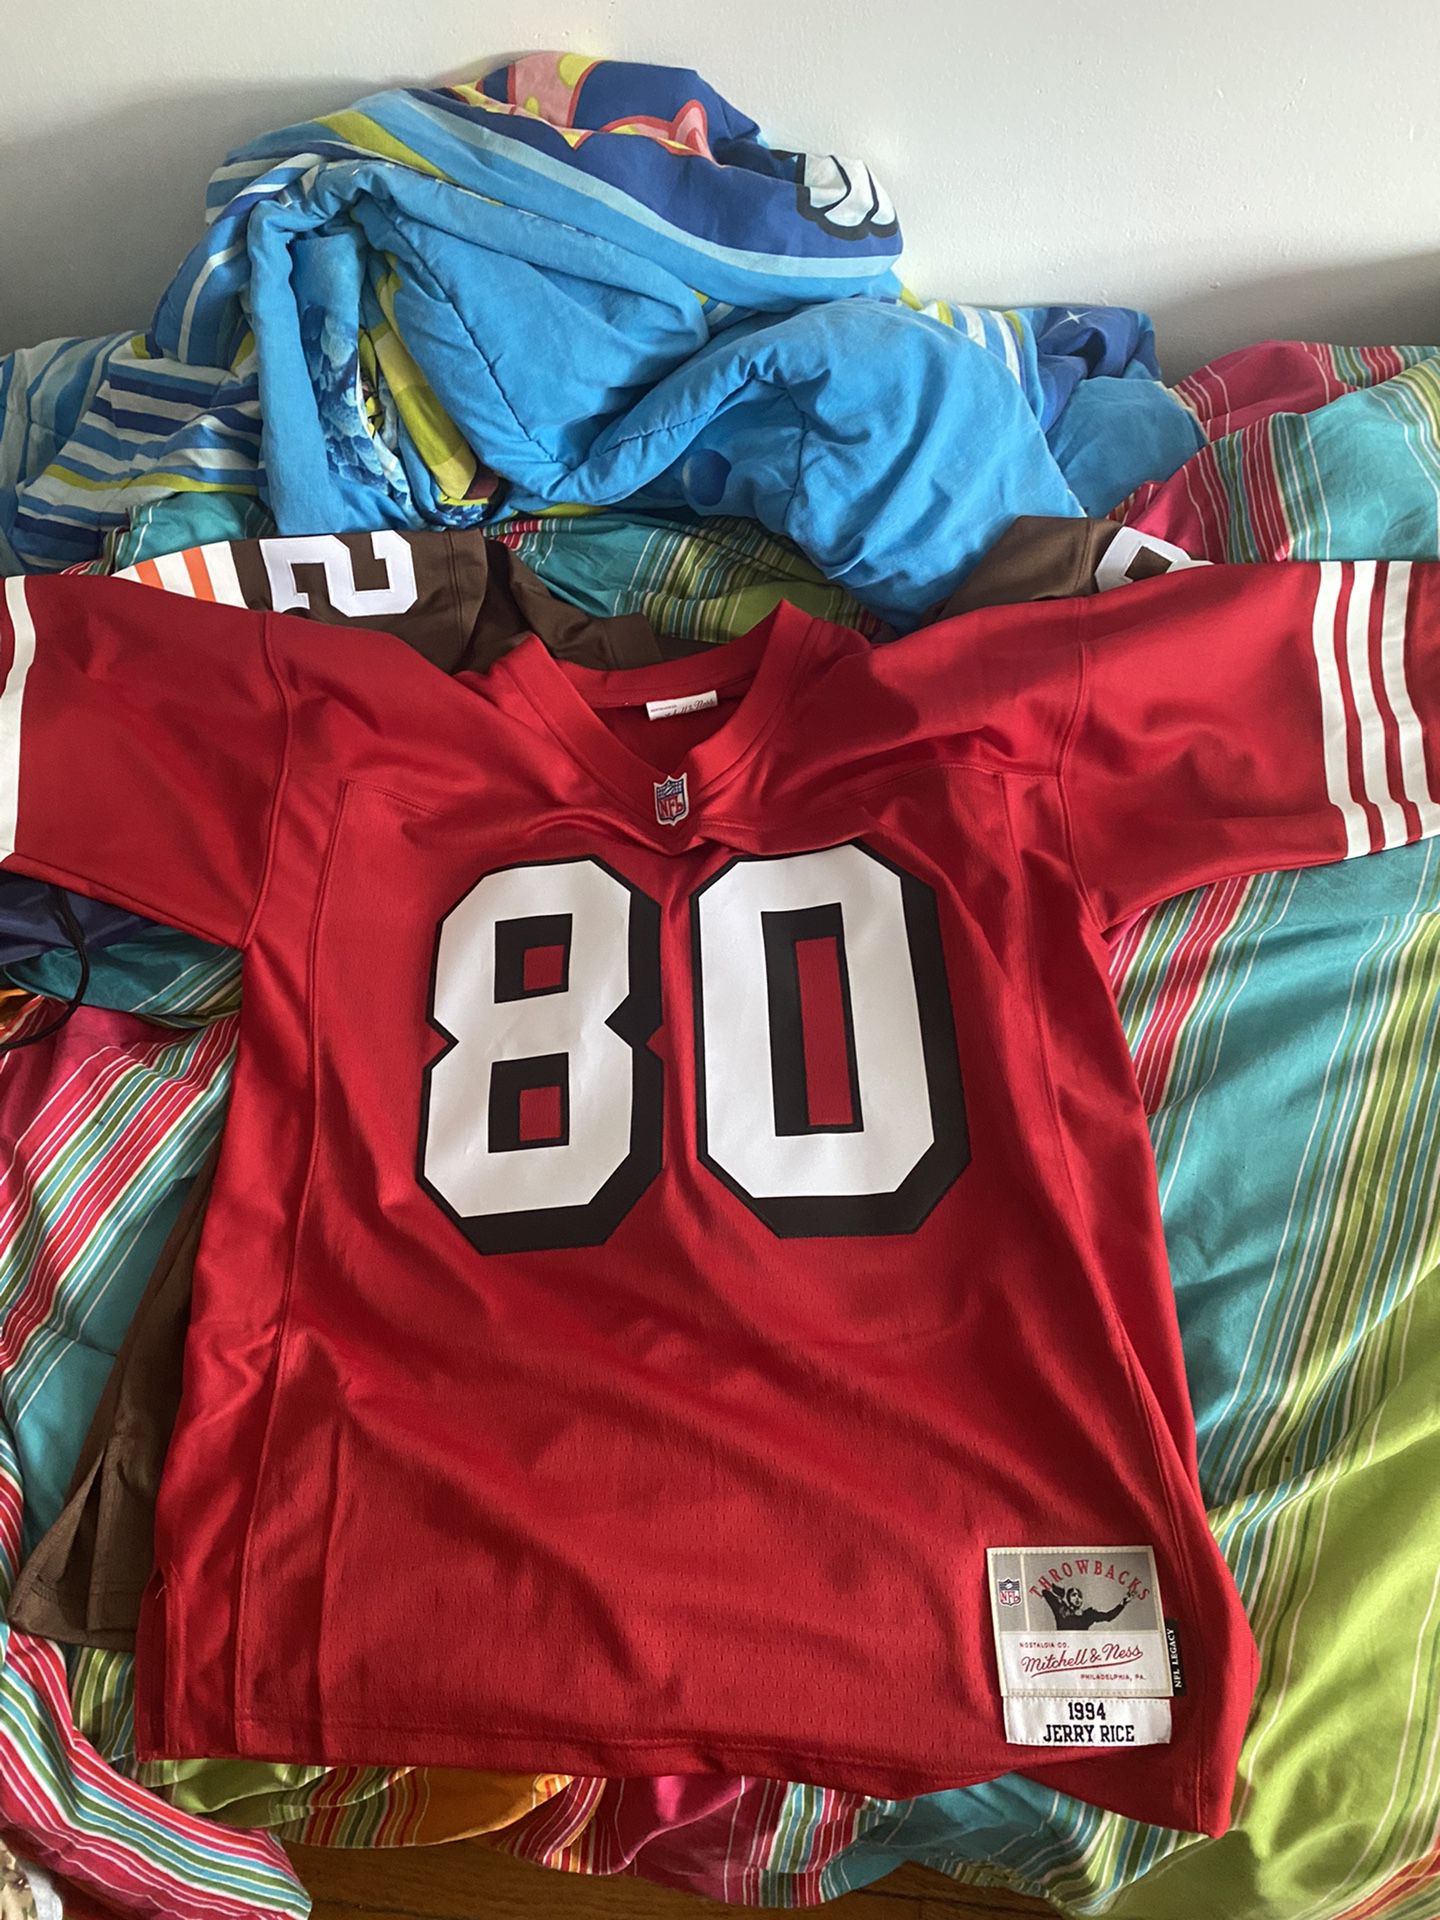 Mitchell And Ness Jerry Rice jersey Brand New No tags 